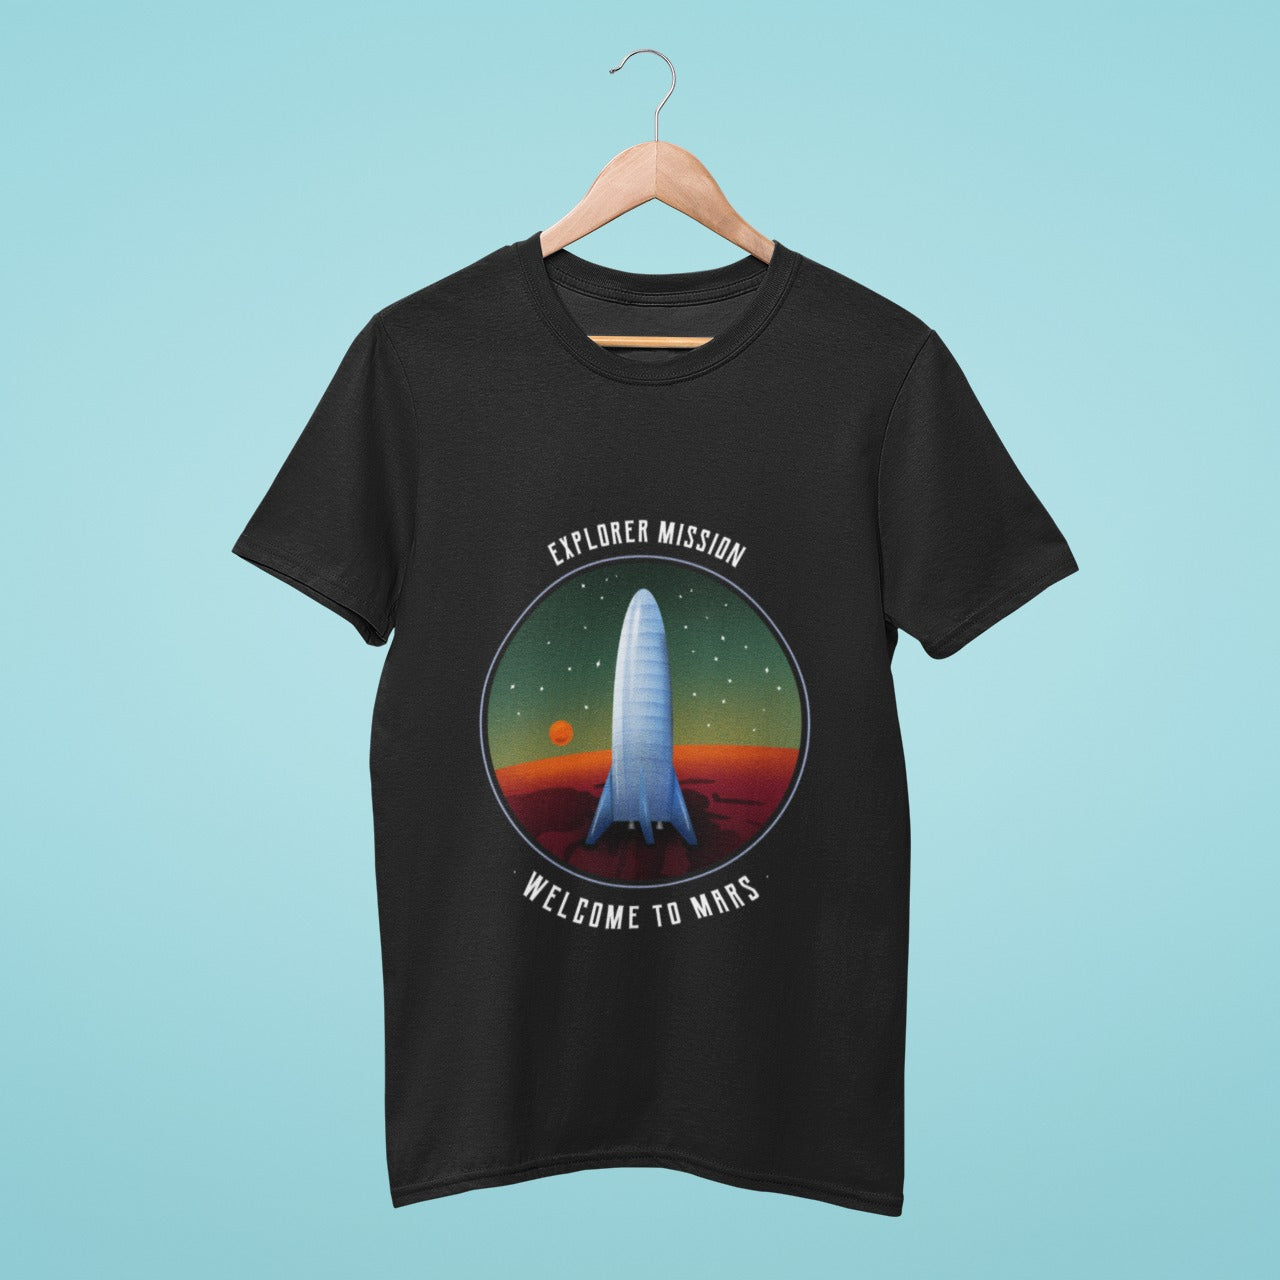 Explore the Red Planet in style with our 'Explorer Mission: Welcome to Mars' t-shirt. Featuring a rocket ready to take off from the Martian surface, this shirt is perfect for space enthusiasts and adventurers alike. Get yours now and embark on your own journey to the stars!